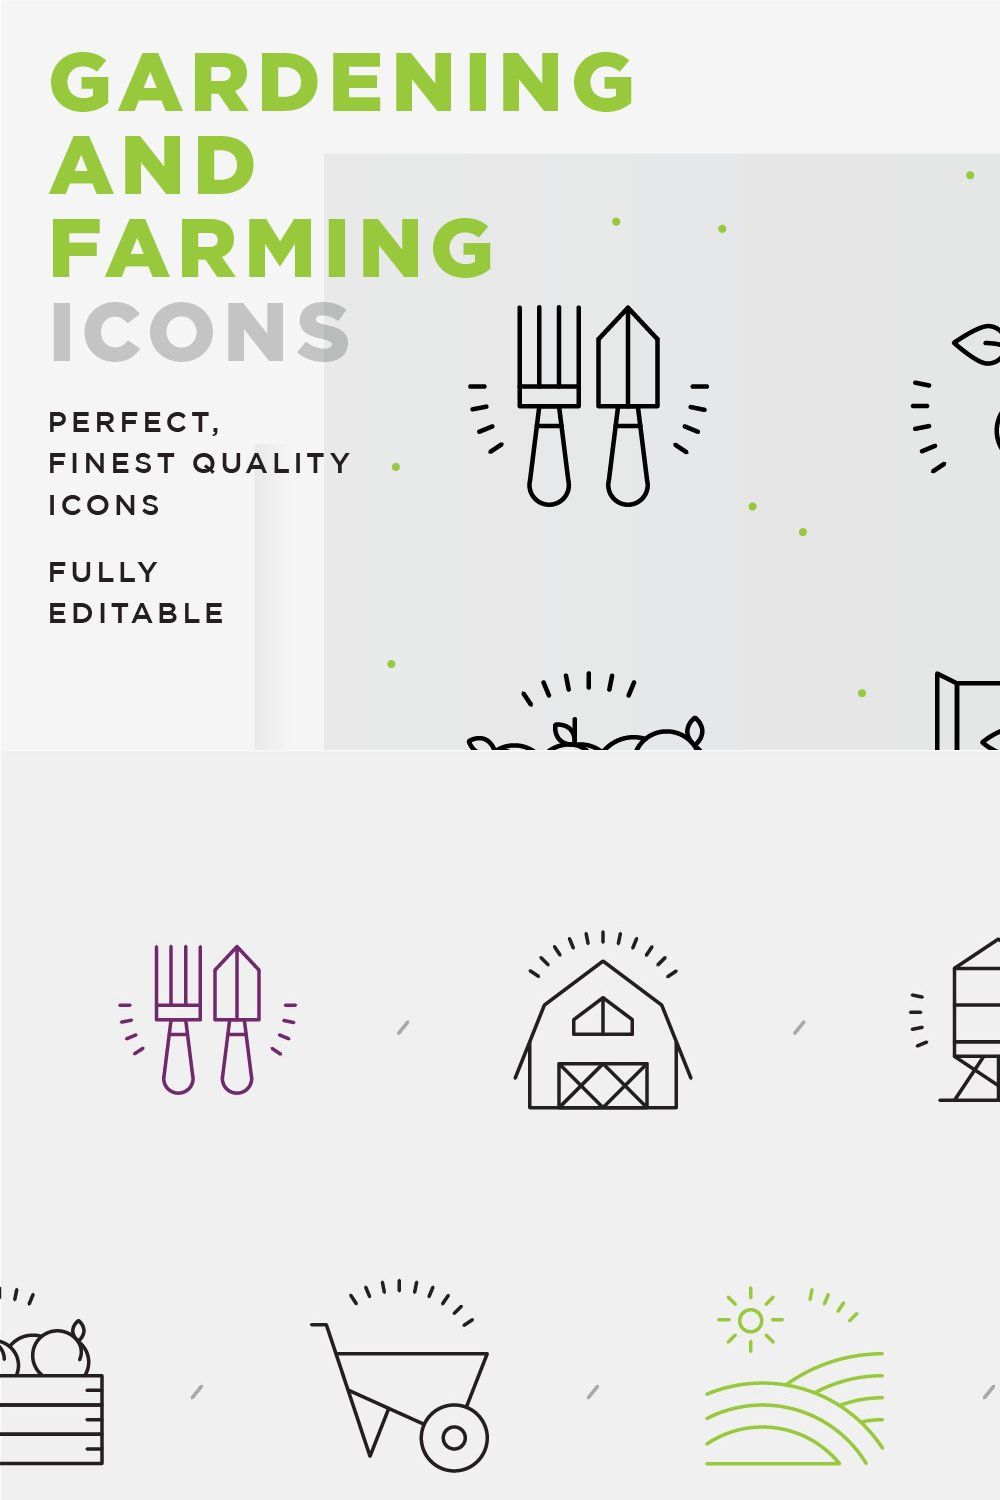 Gardening and Farming icons pinterest preview image.